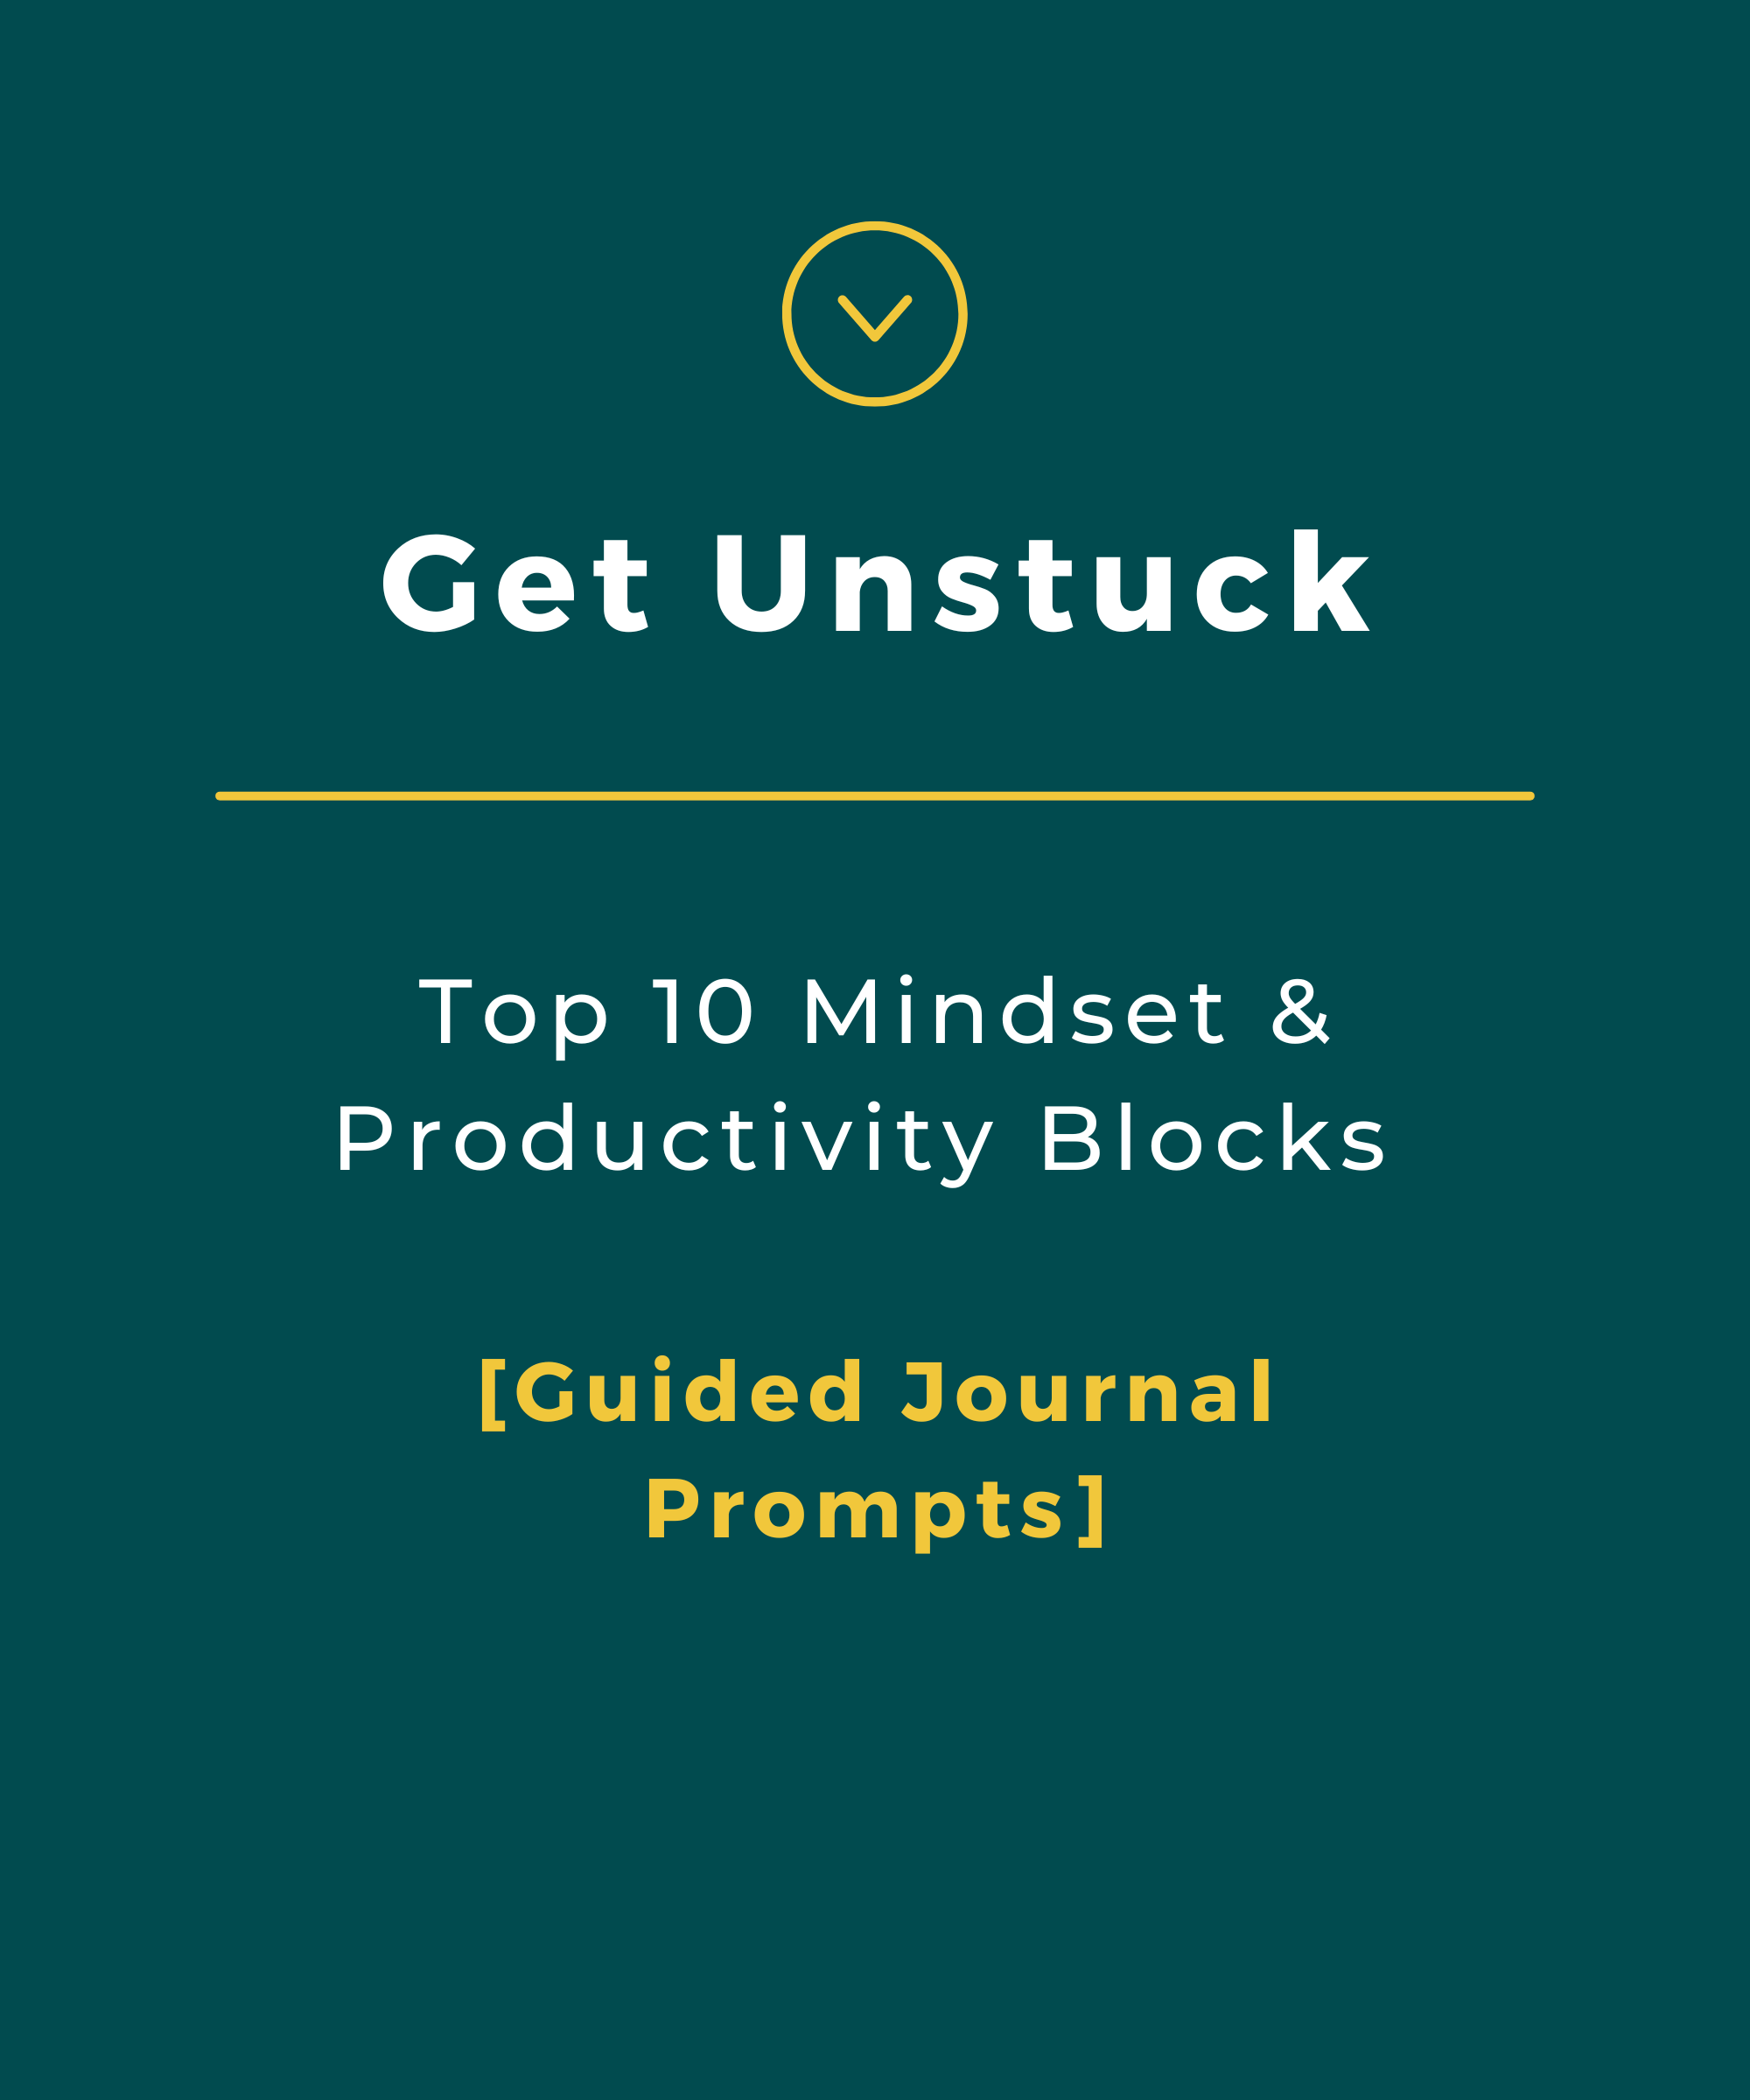 Get unstuck top 10 mindset and productivity blocks with guided journal prompts